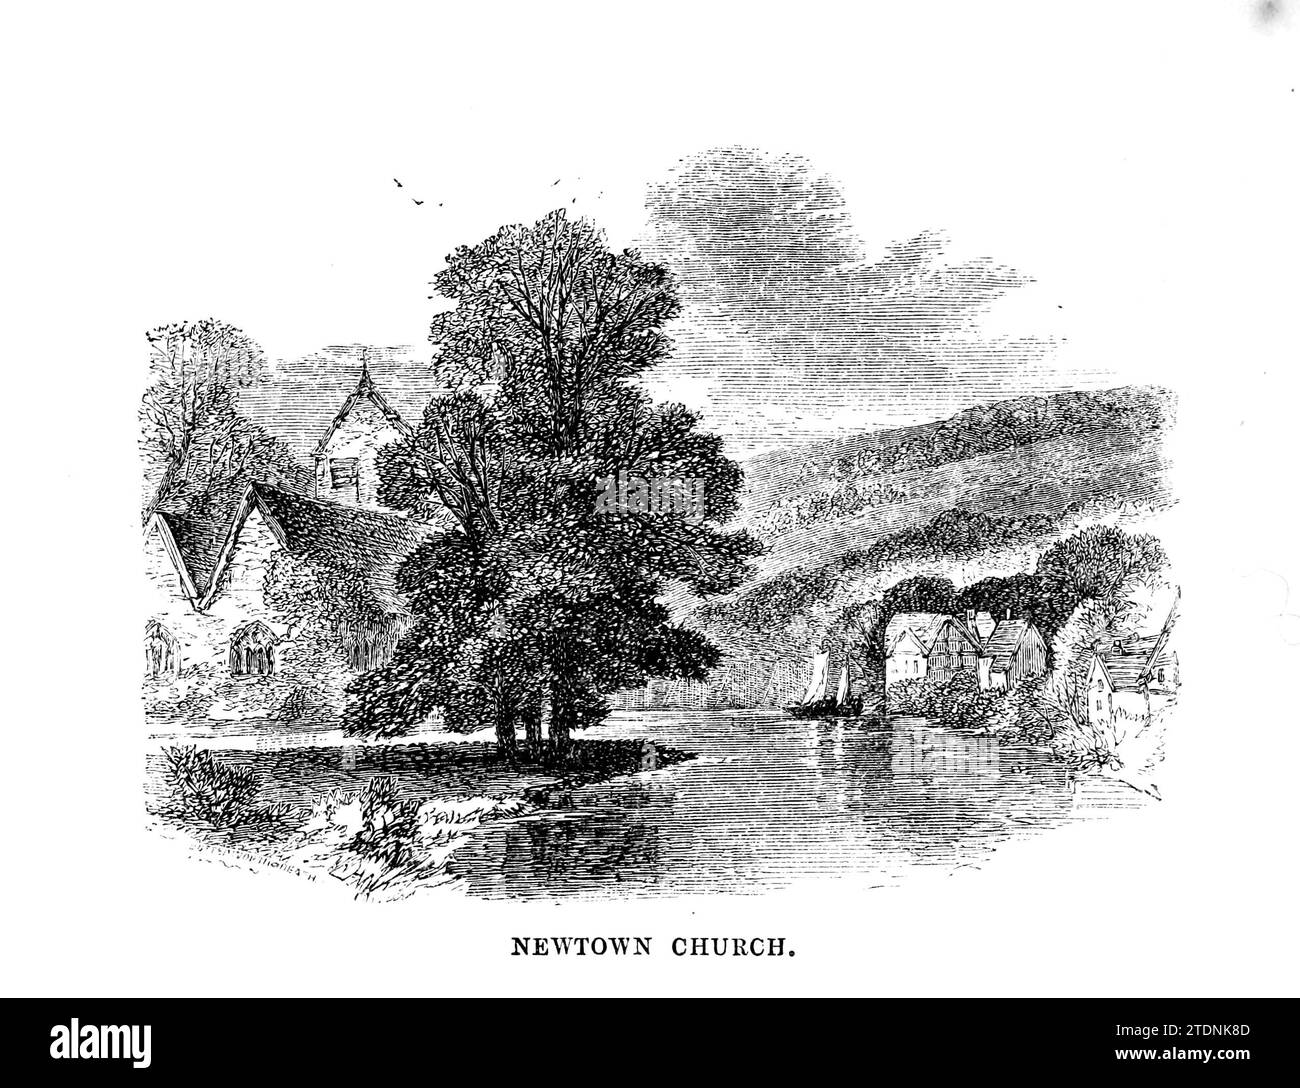 Newtown Church, Newtown is a town in Powys, Wales from the book The Severn valley: a series of sketches, descriptive and pictorial, of the course of the Severn: containing notices of its topographical, industrial, and geological features; with glances at its historical and legendary associations by Randall, John, 1810-1910 Publication date 1862 Publisher J. S. Virtue Stock Photo